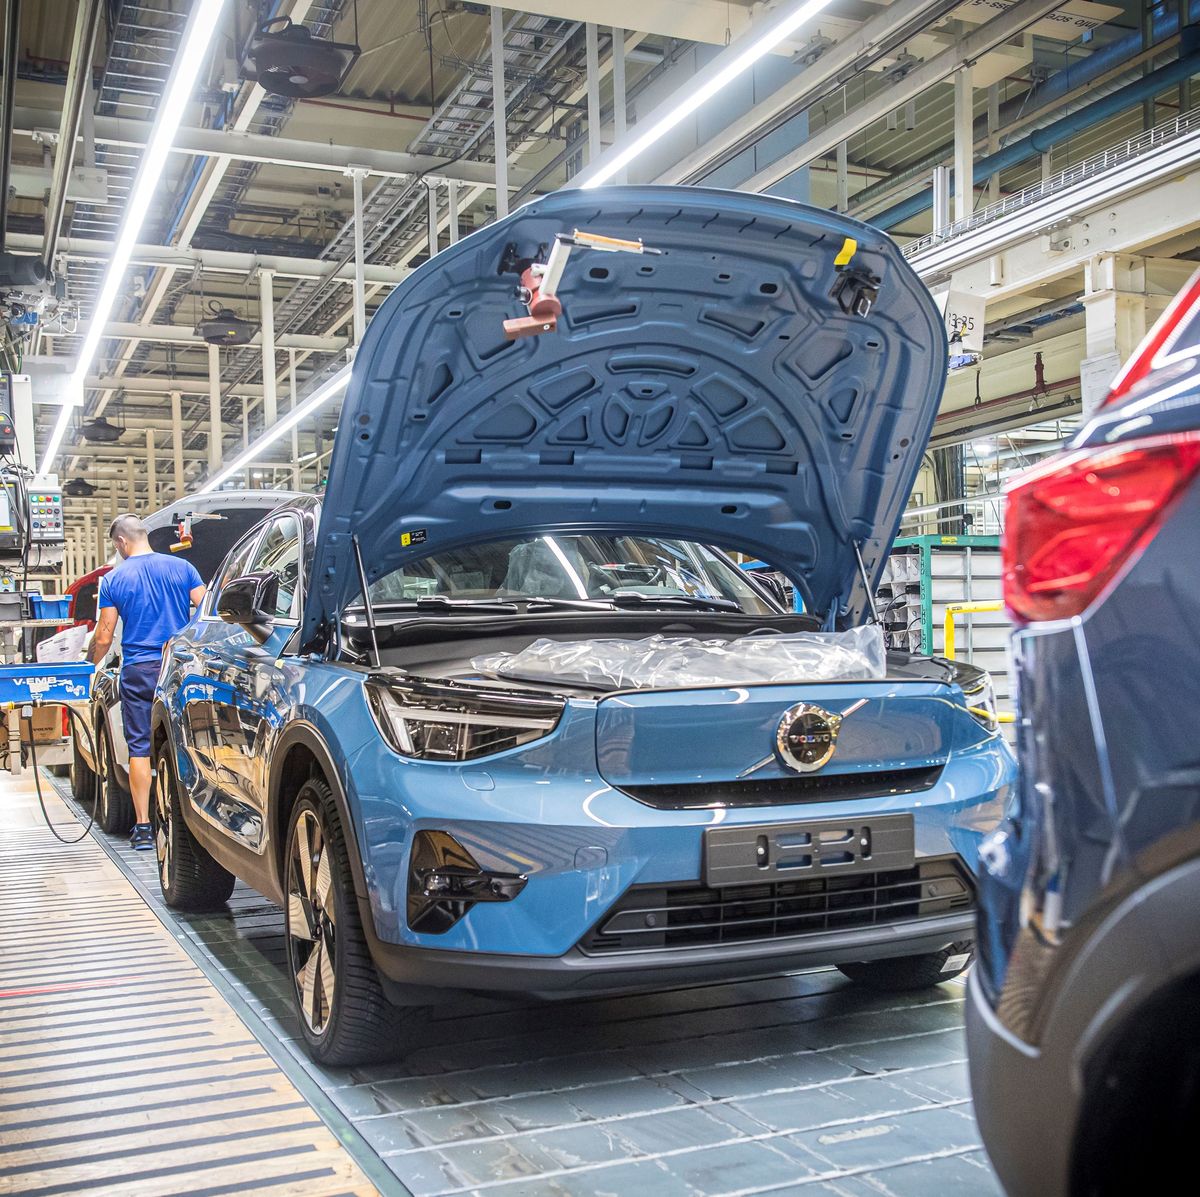 Made in Eisenach: First front-wheel drive Opel Grandland X plug-in hybrid  drives off production line, Opel